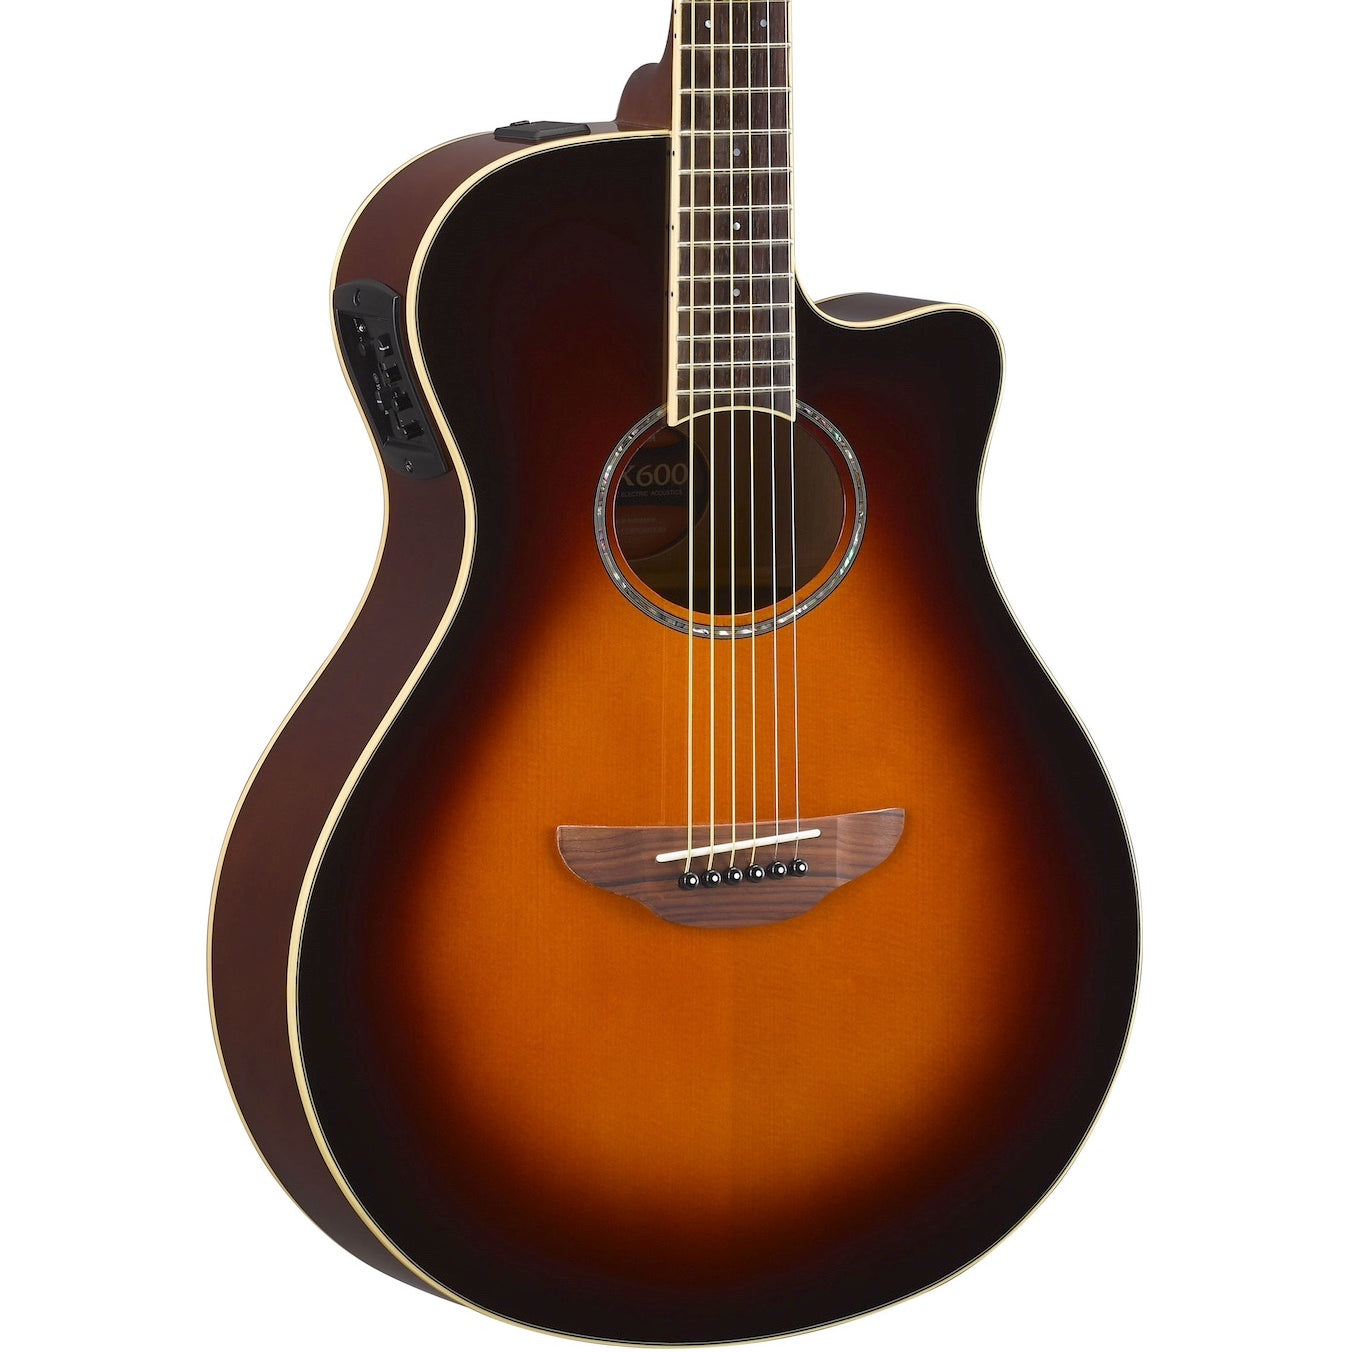 Yamaha APX600 Thinline Old Violin Sunburst | Music Experience | Shop Online | South Africa